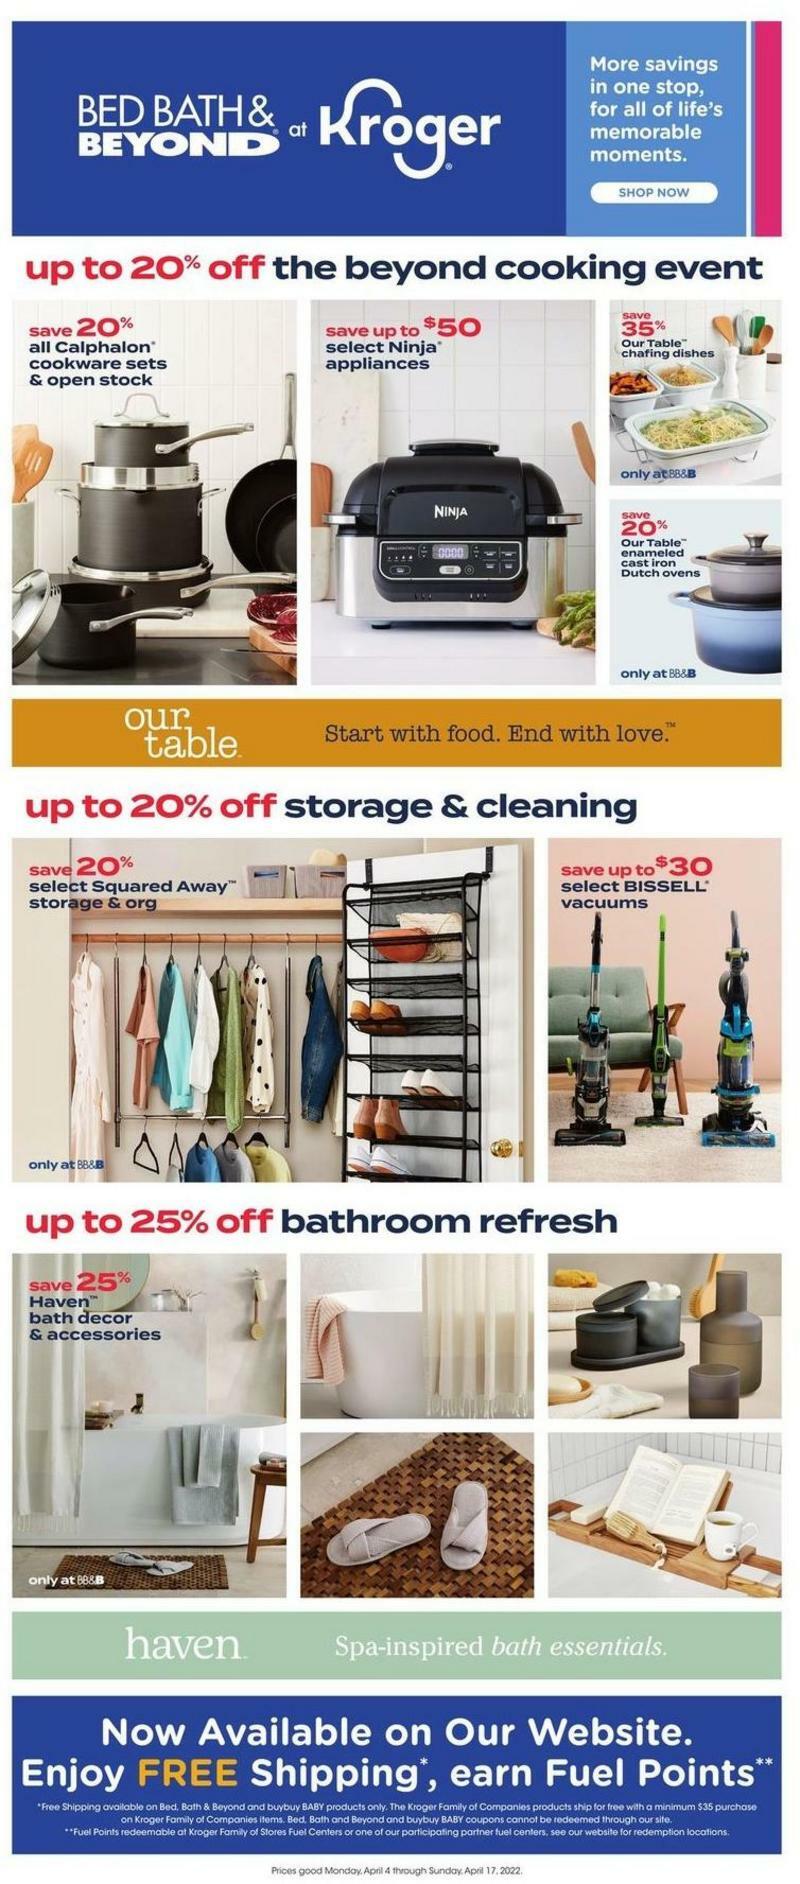 Kroger Bed, Bath & Beyond Weekly Ad from April 4